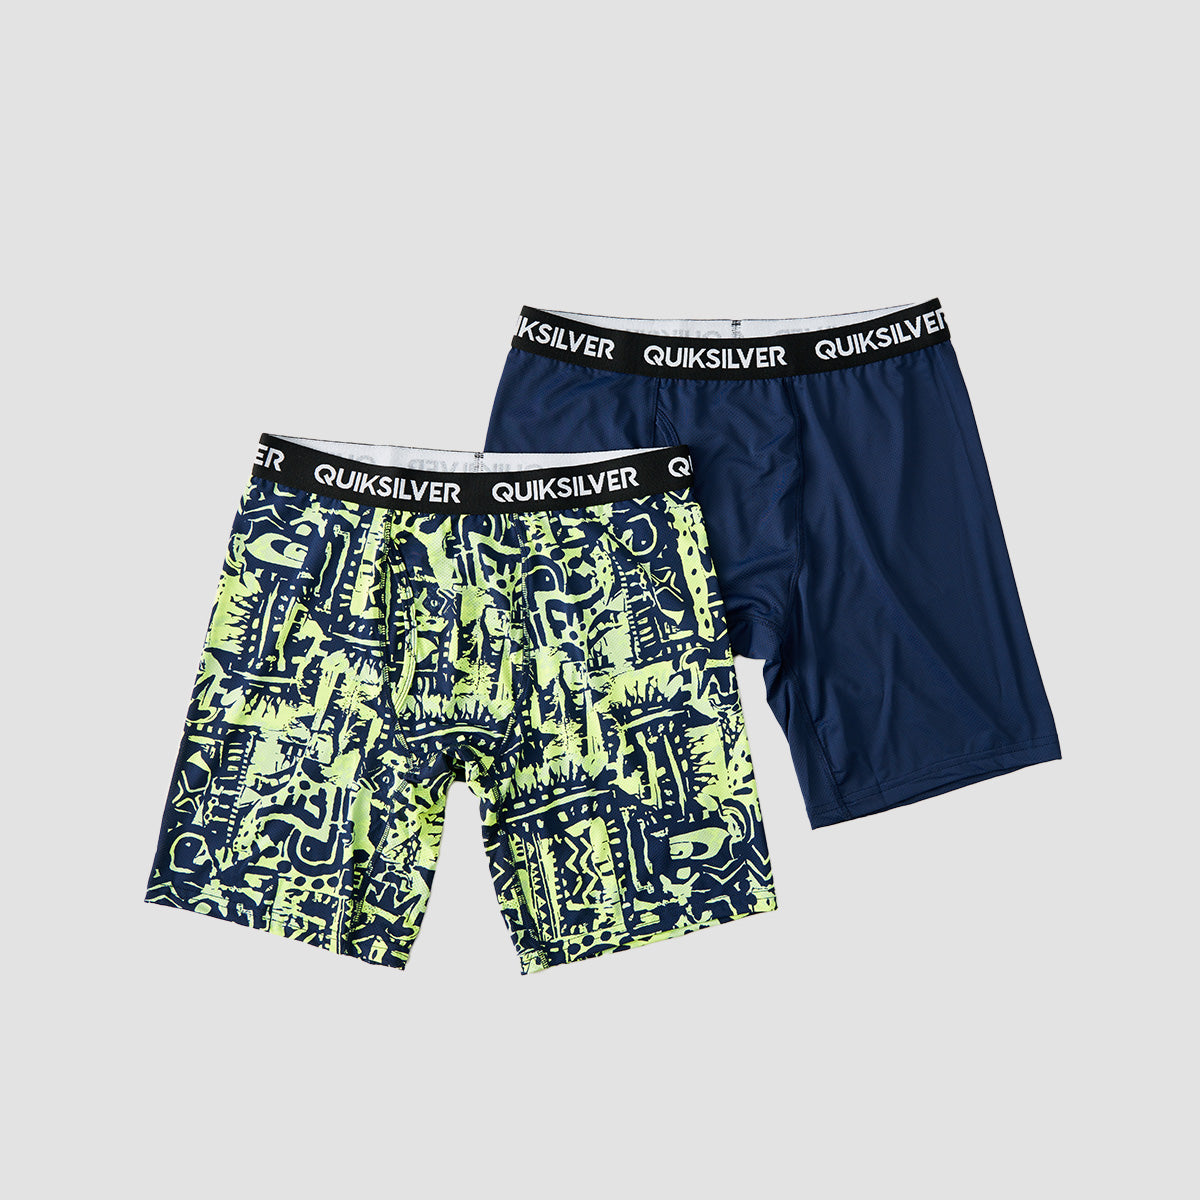 Quiksilver Performance Boxer Shorts 2 Pack Naval Accademy